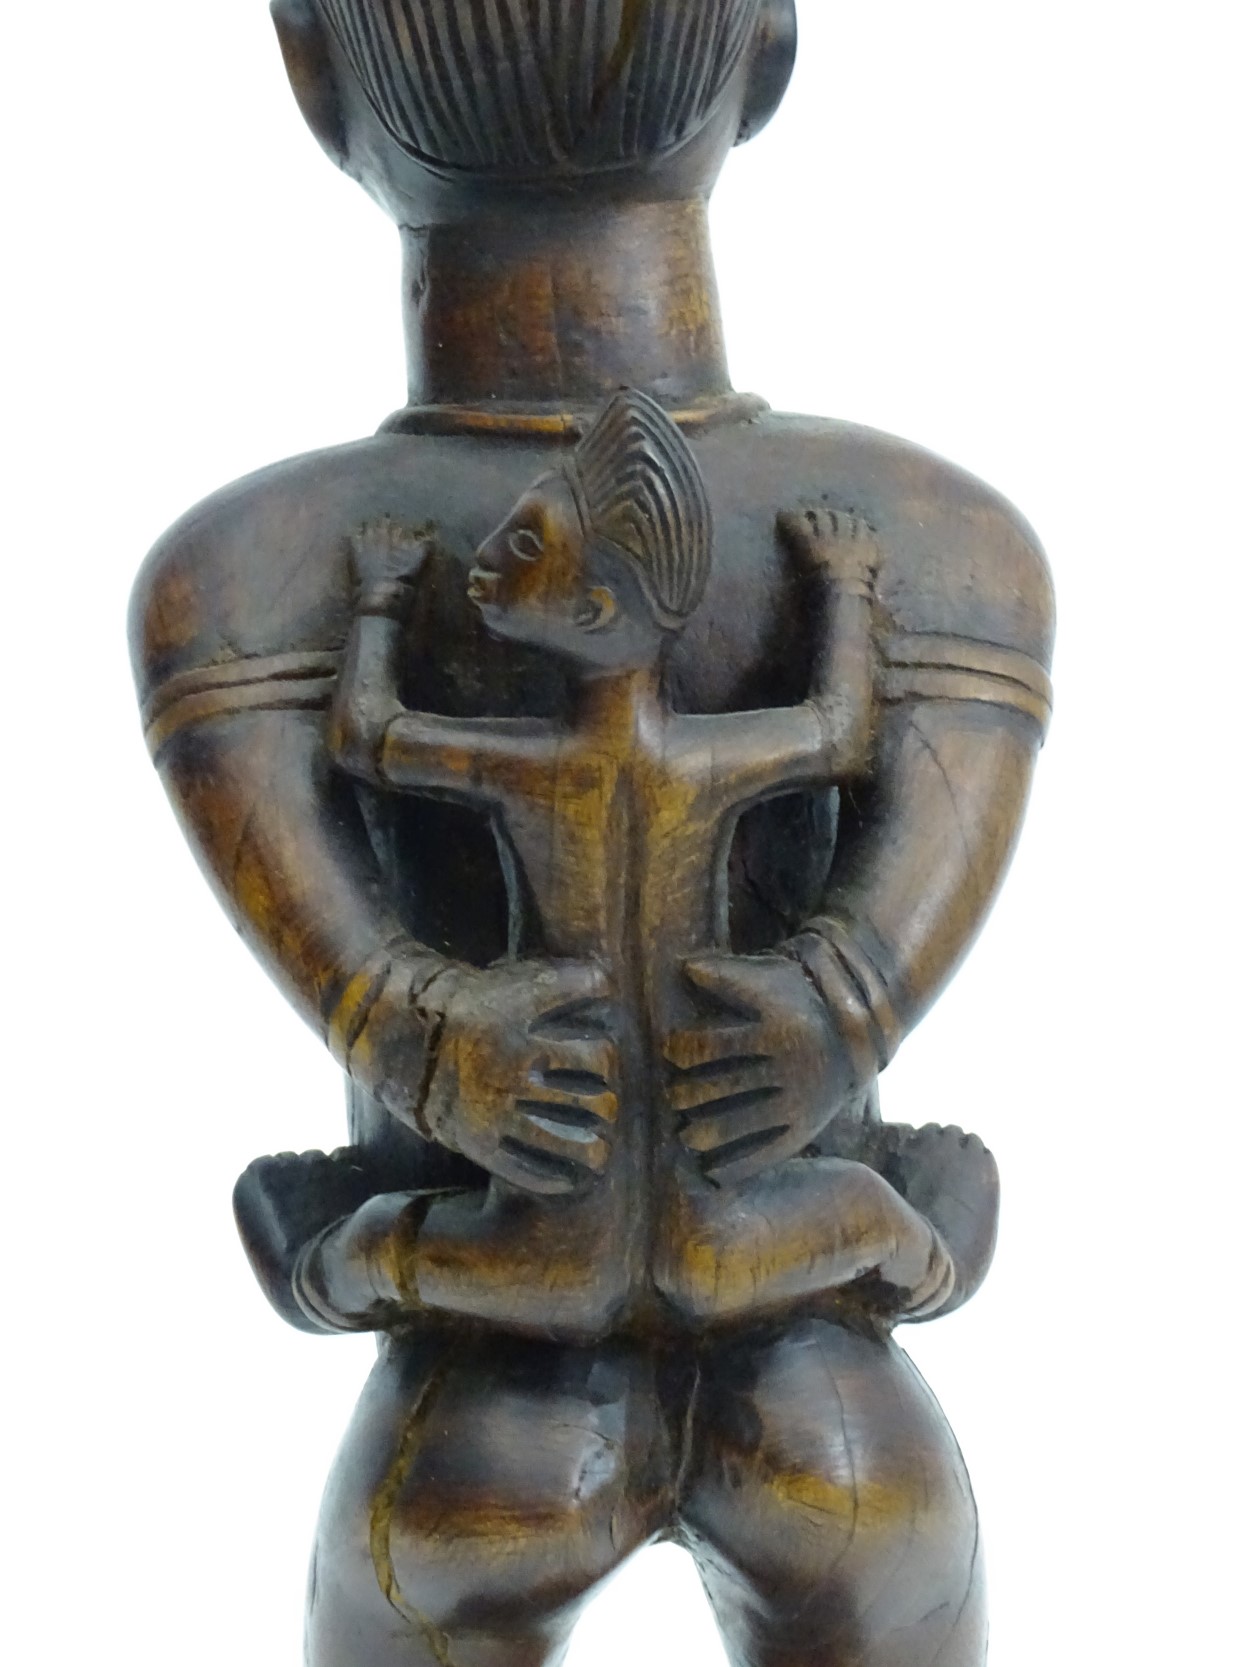 Tribal : An Ethnographic Native Tribal Kongo maternity figure. Approx. 18 1/2" high. - Image 10 of 11